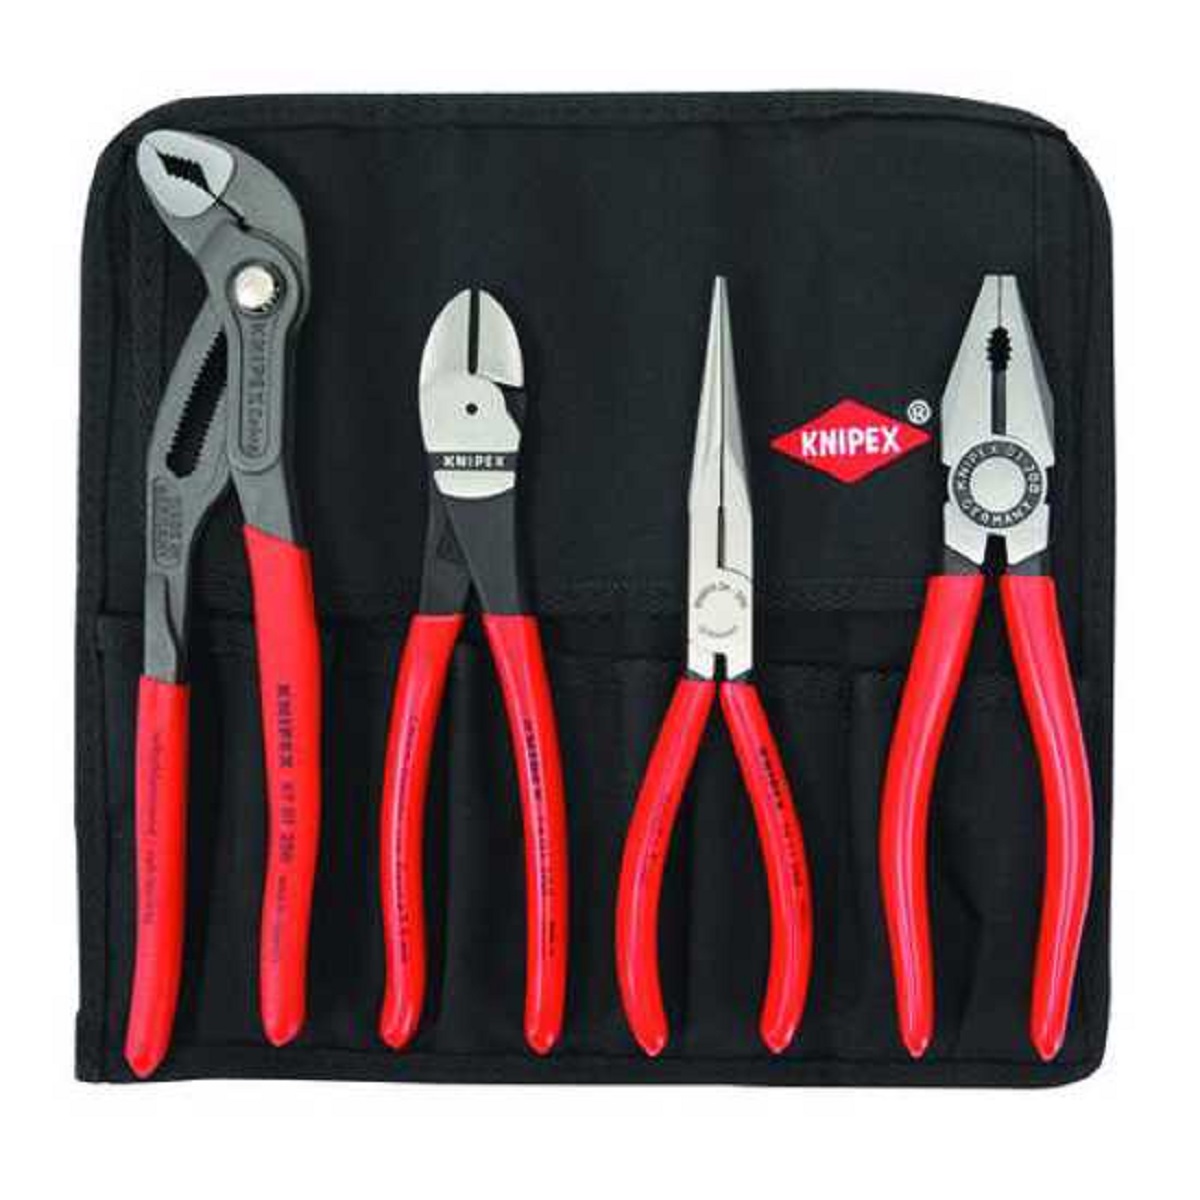 Knipex Pliers Set 4pc Wallet